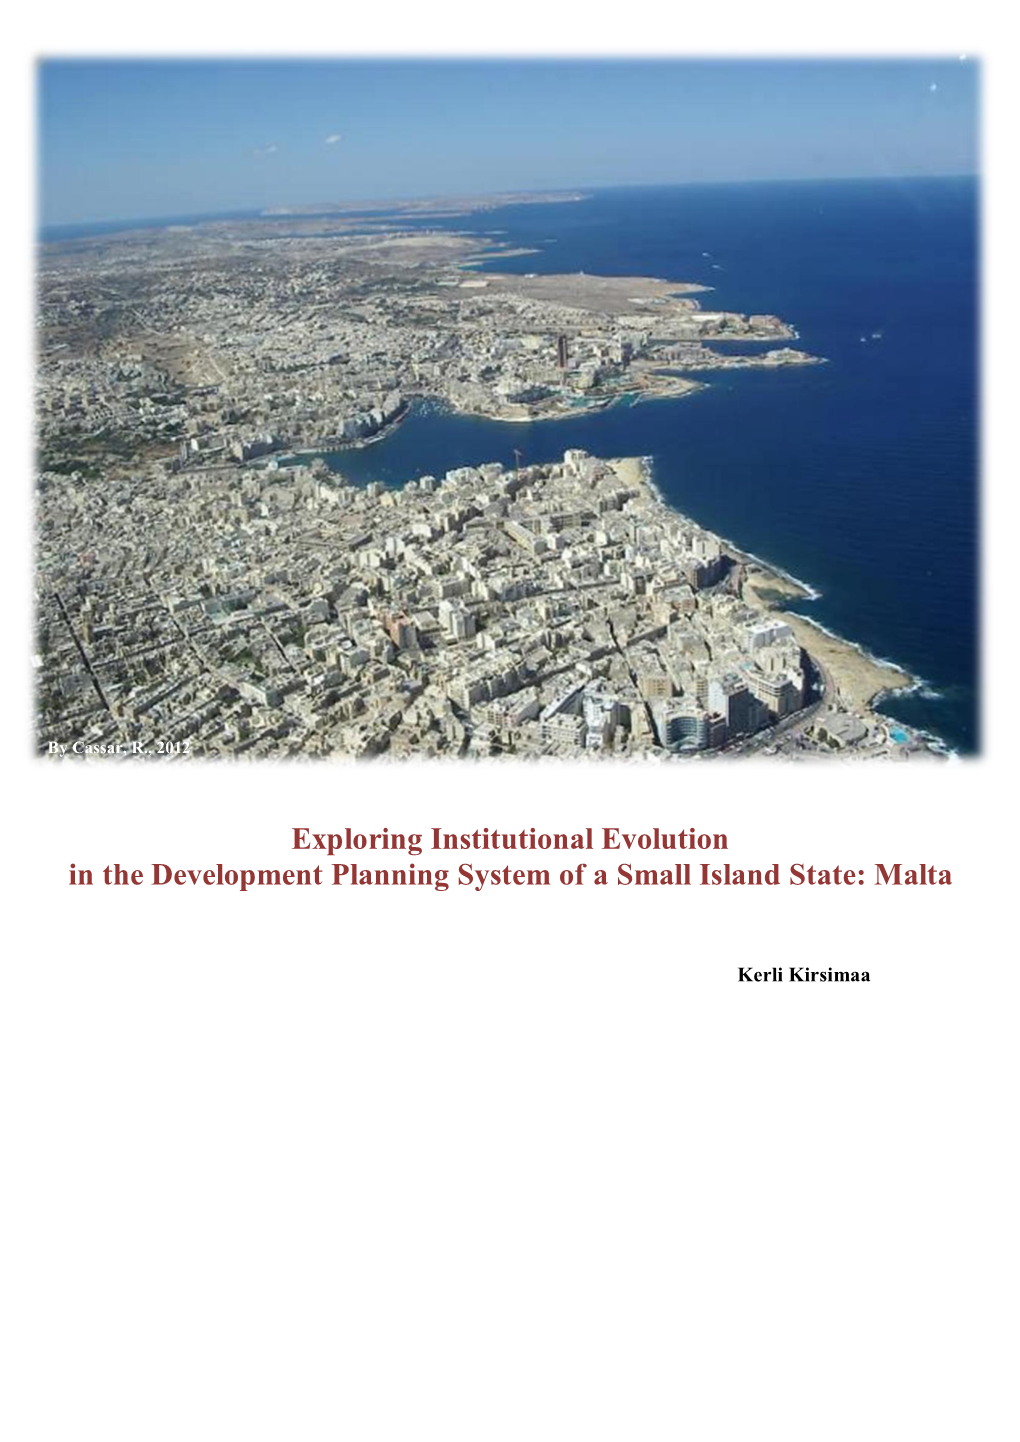 Exploring Institutional Evolution in the Development Planning System of a Small Island State: Malta